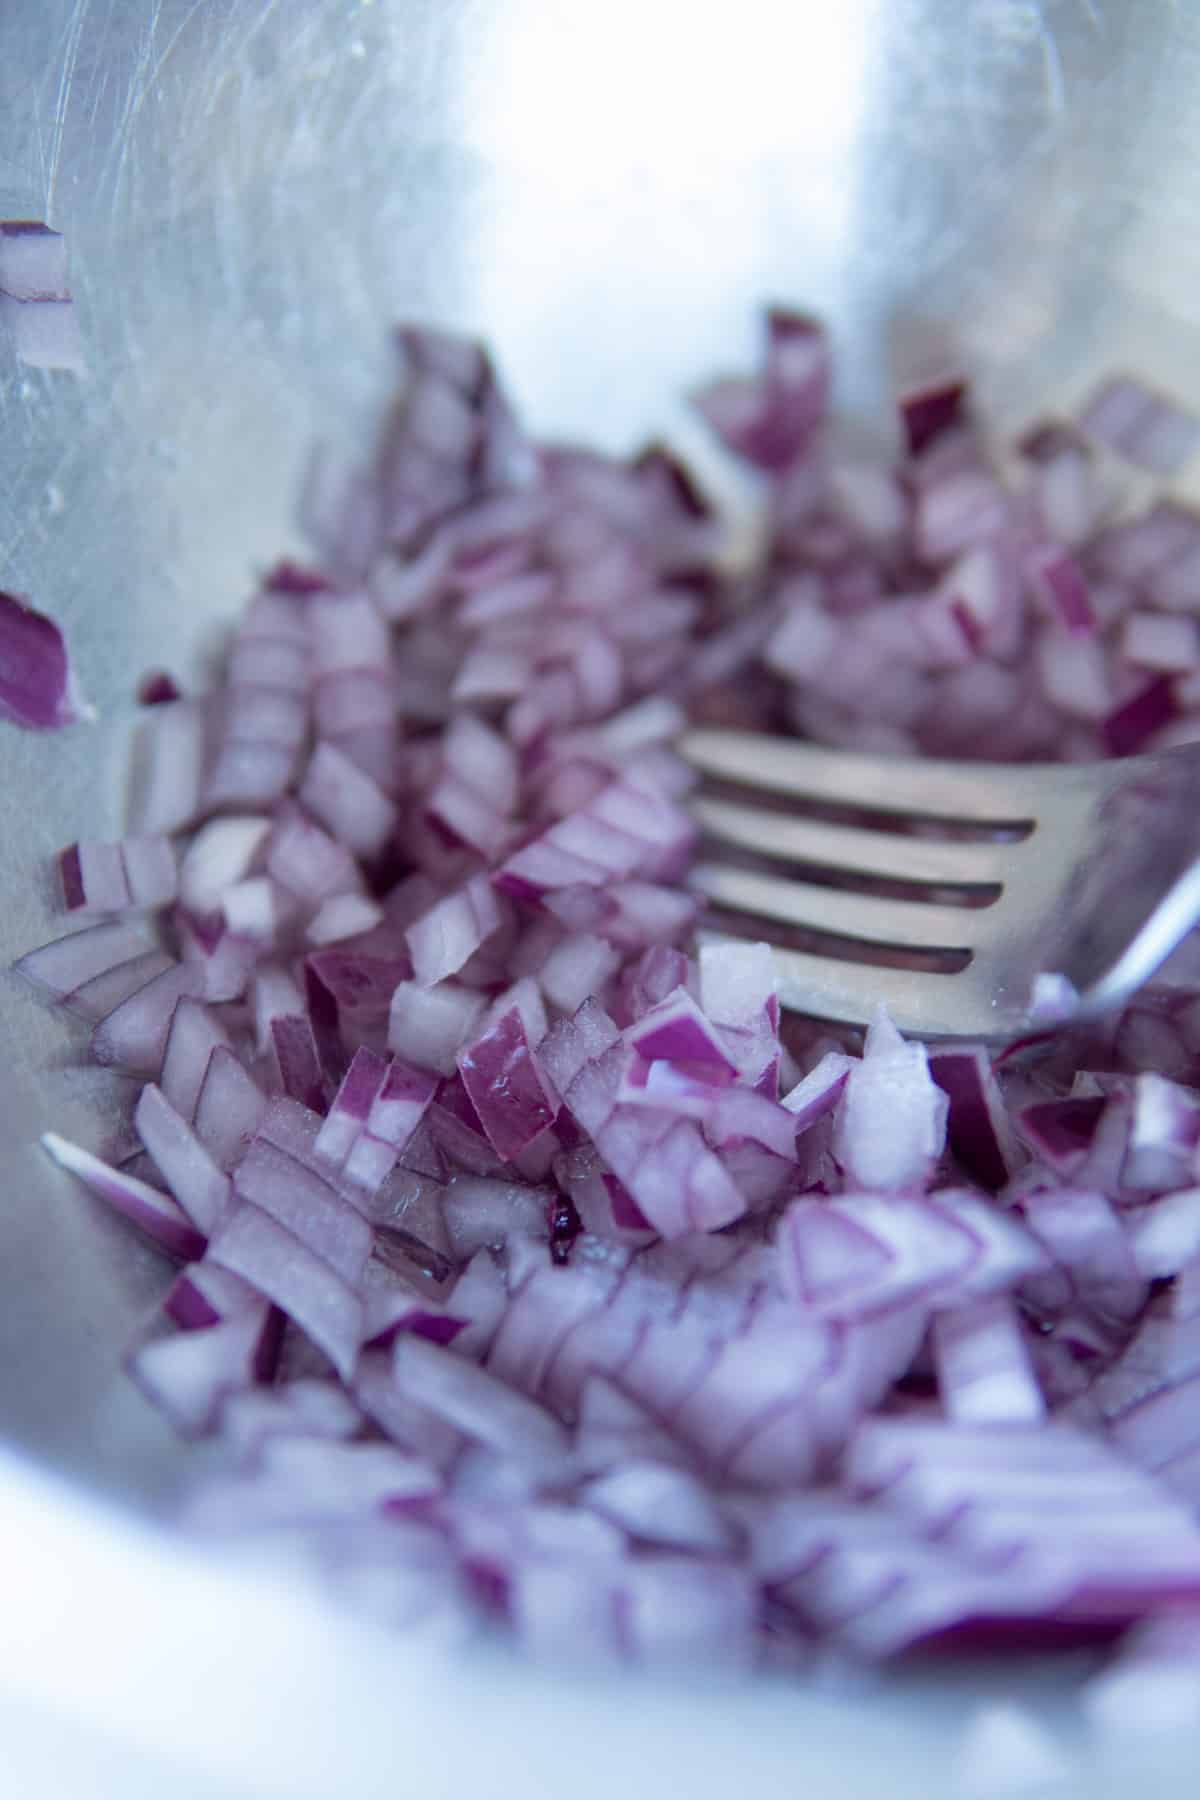 Diced red onions with lemon juice.